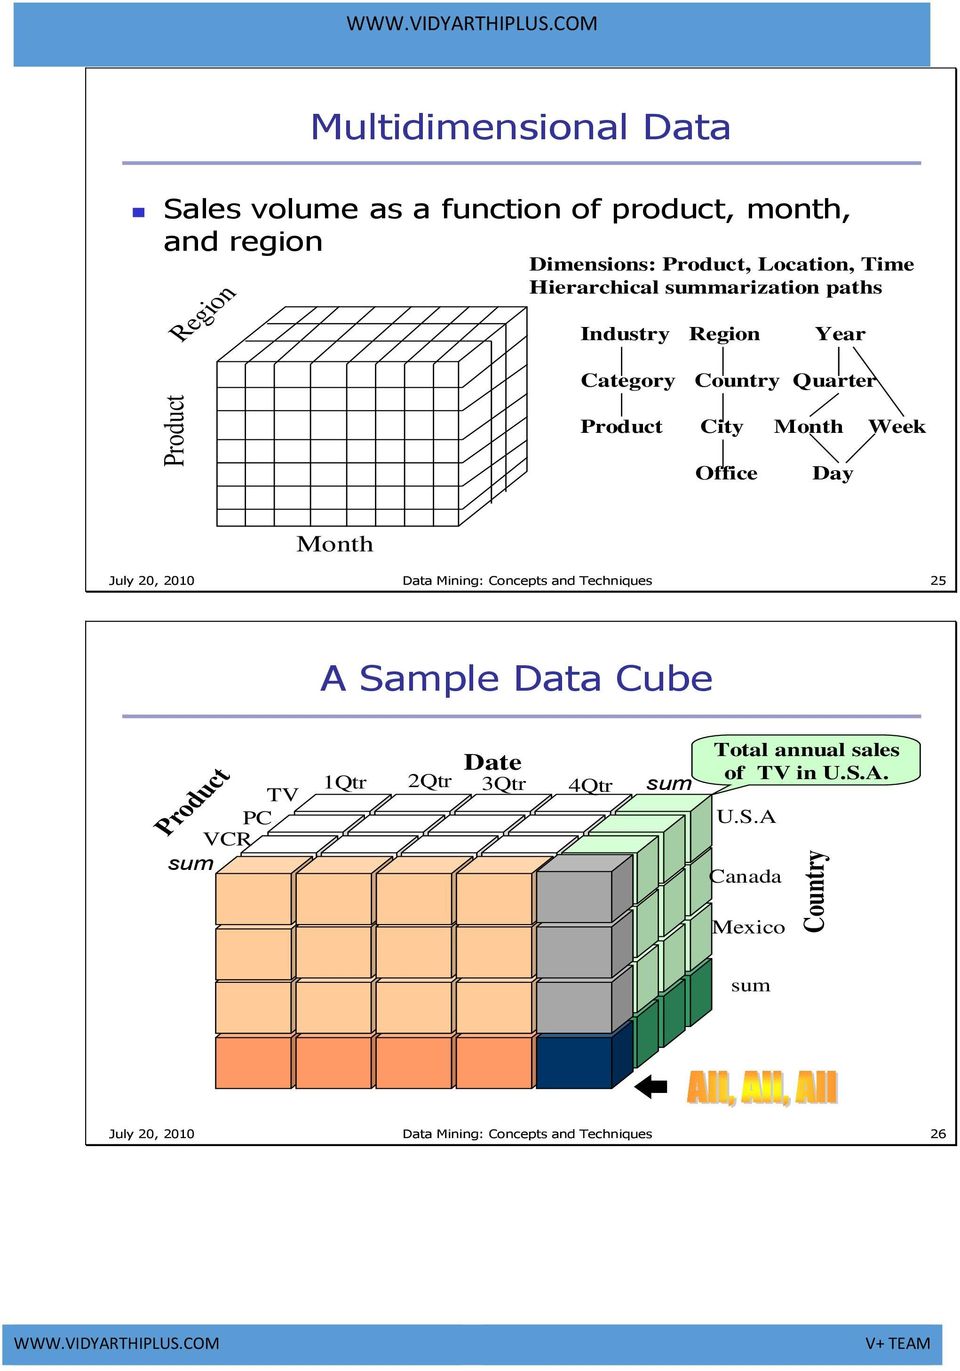 Month July 20, 2010 Data Mining: Concepts and Techniques 25 A Sample Data Cube TV PC VCR sum Product Date 1Qtr 2Qtr 3Qtr